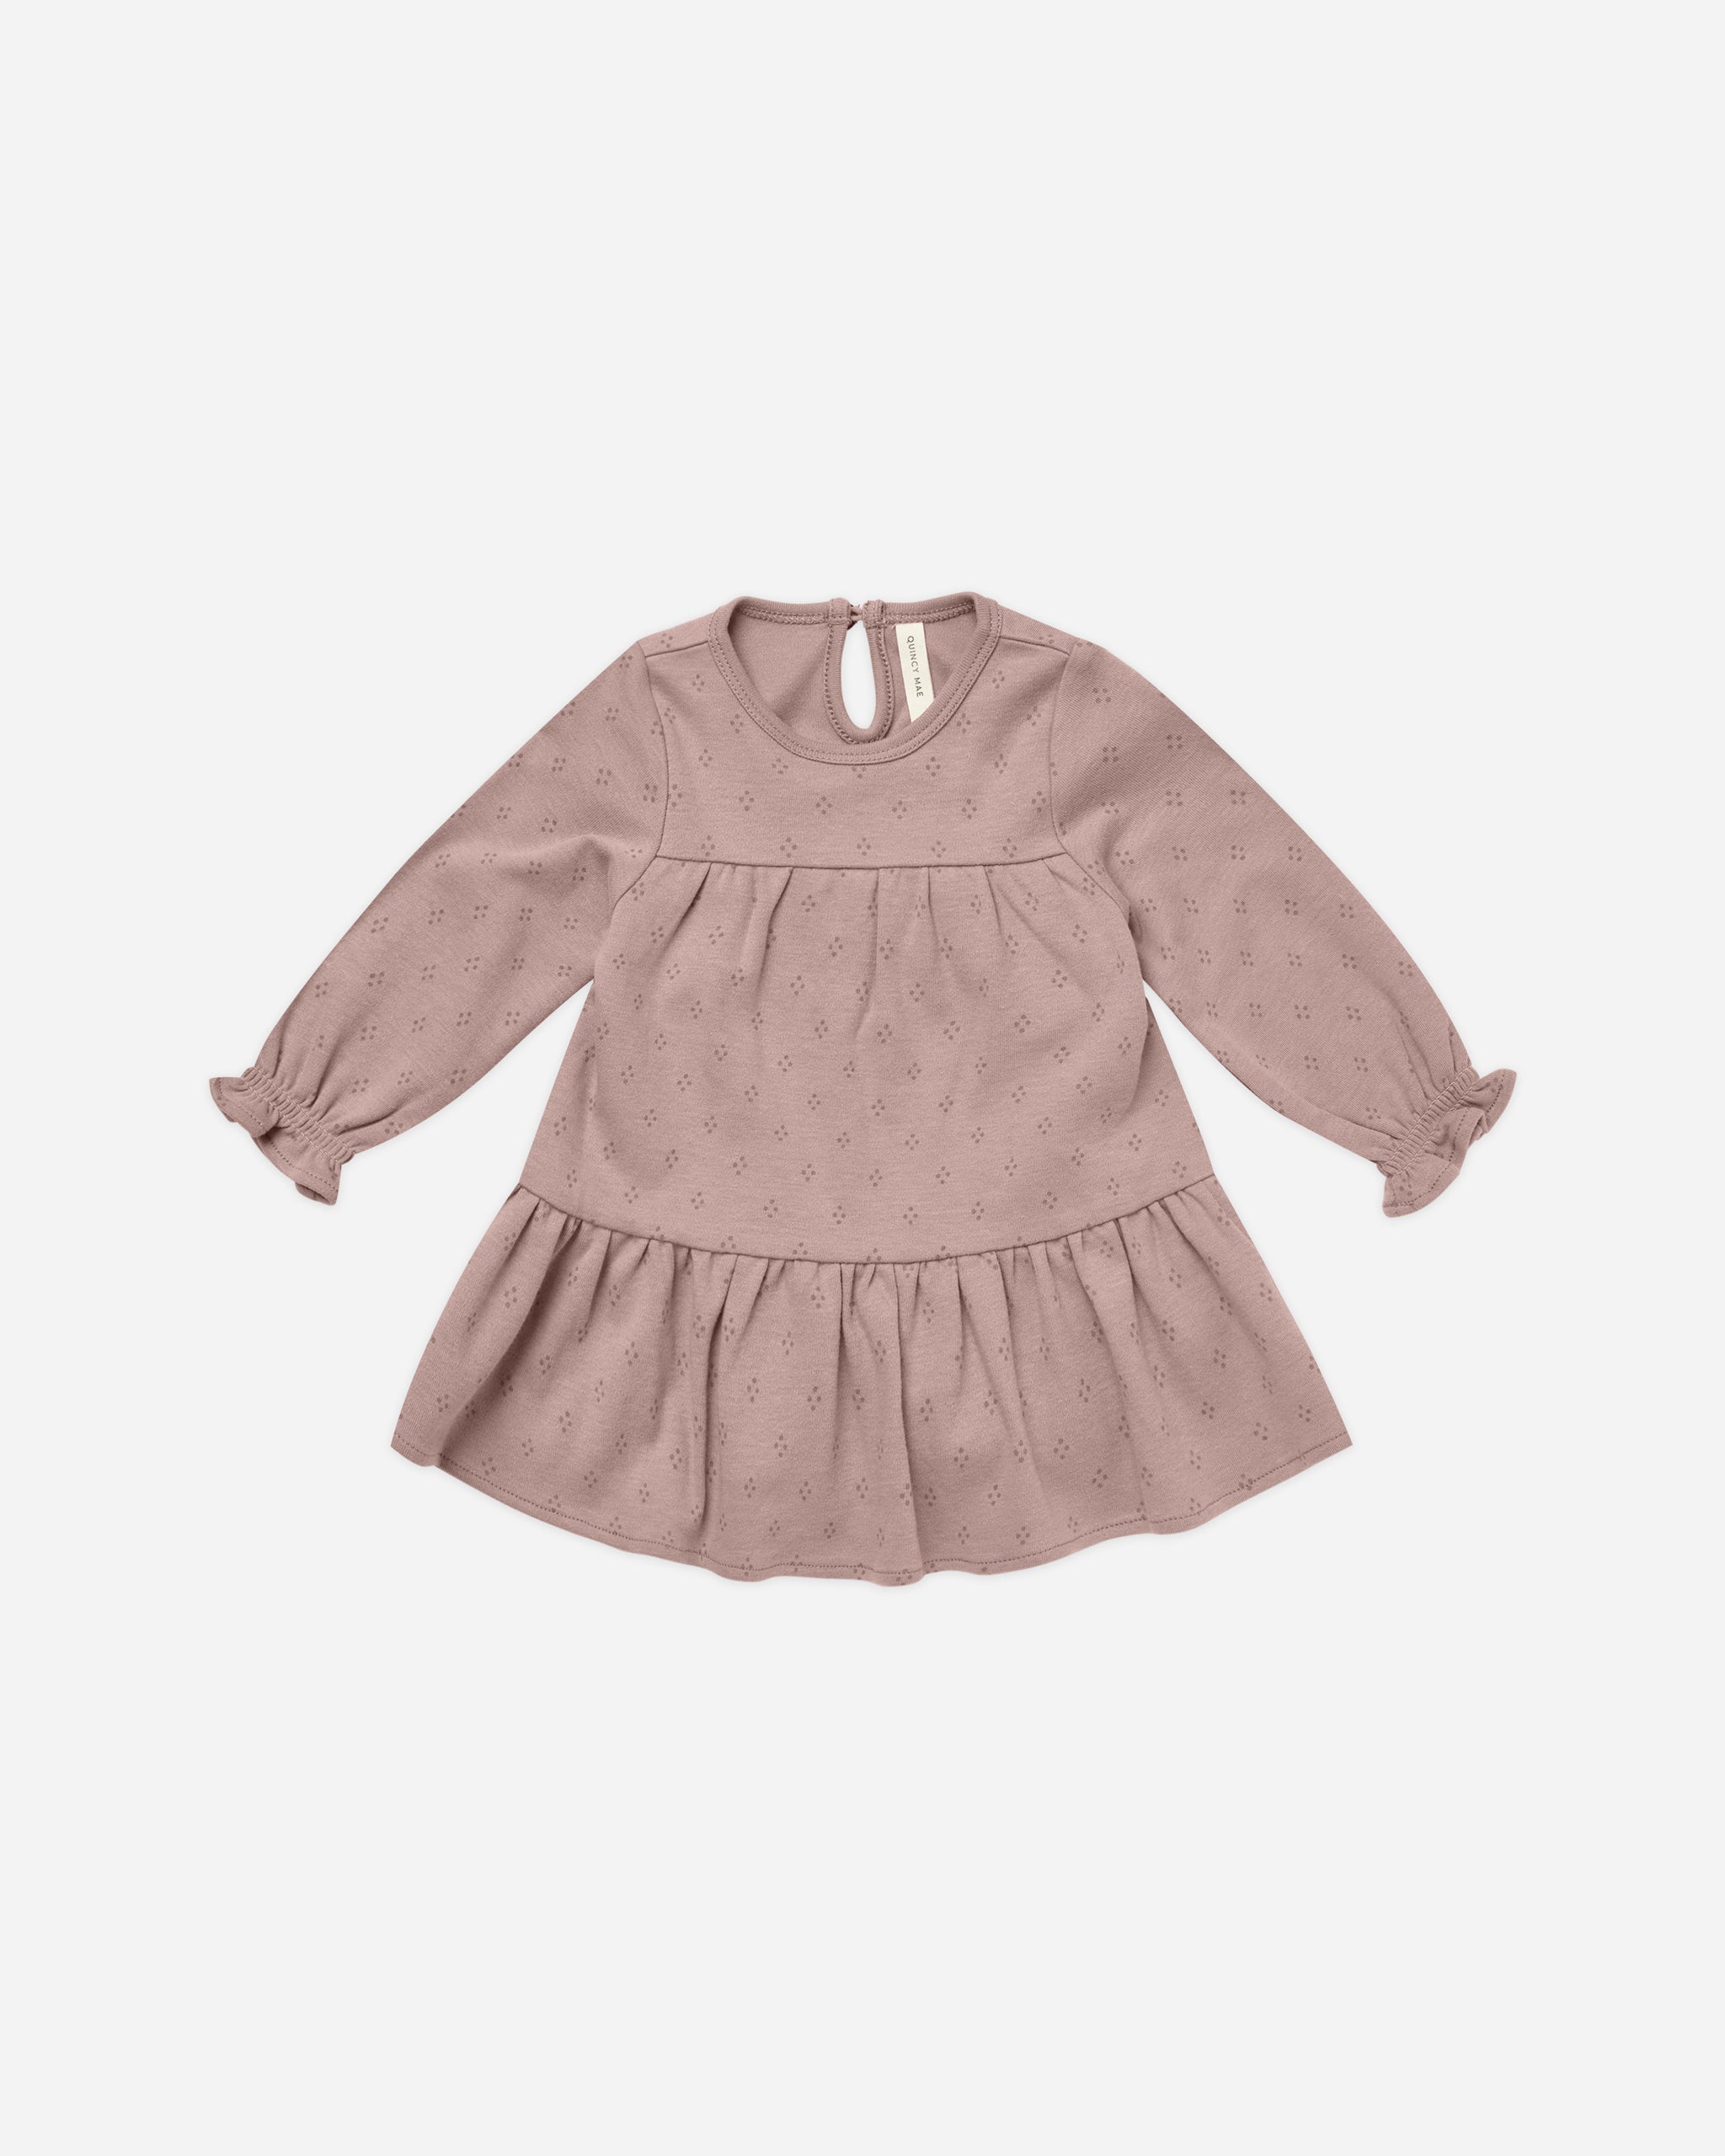 Tiered Jersey Dress || Dotty - Rylee + Cru | Kids Clothes | Trendy Baby Clothes | Modern Infant Outfits |